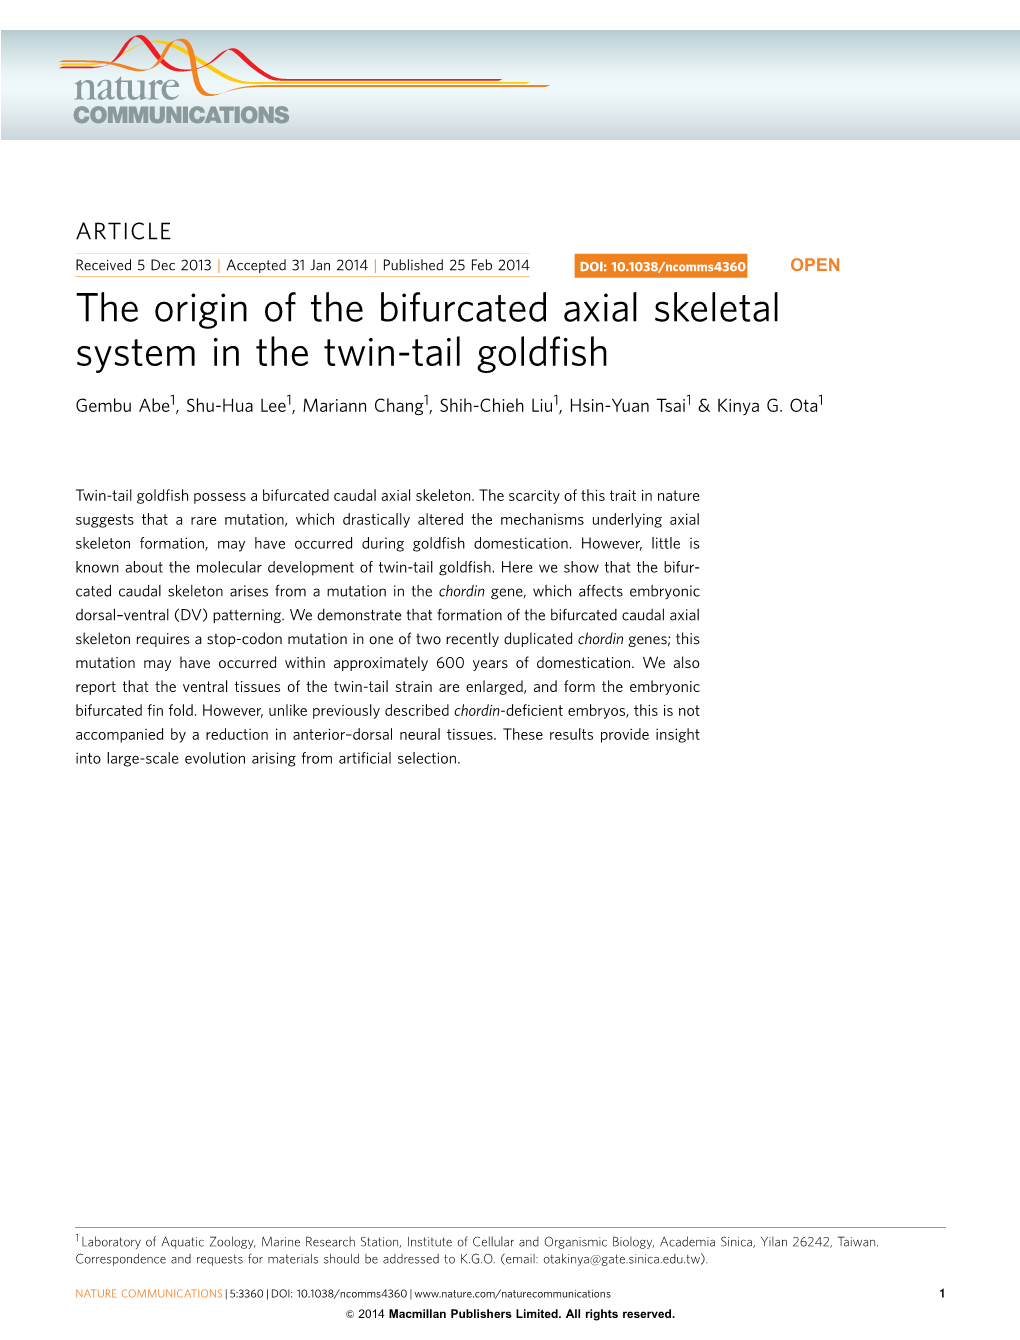 The Origin of the Bifurcated Axial Skeletal System in the Twin-Tail Goldfish